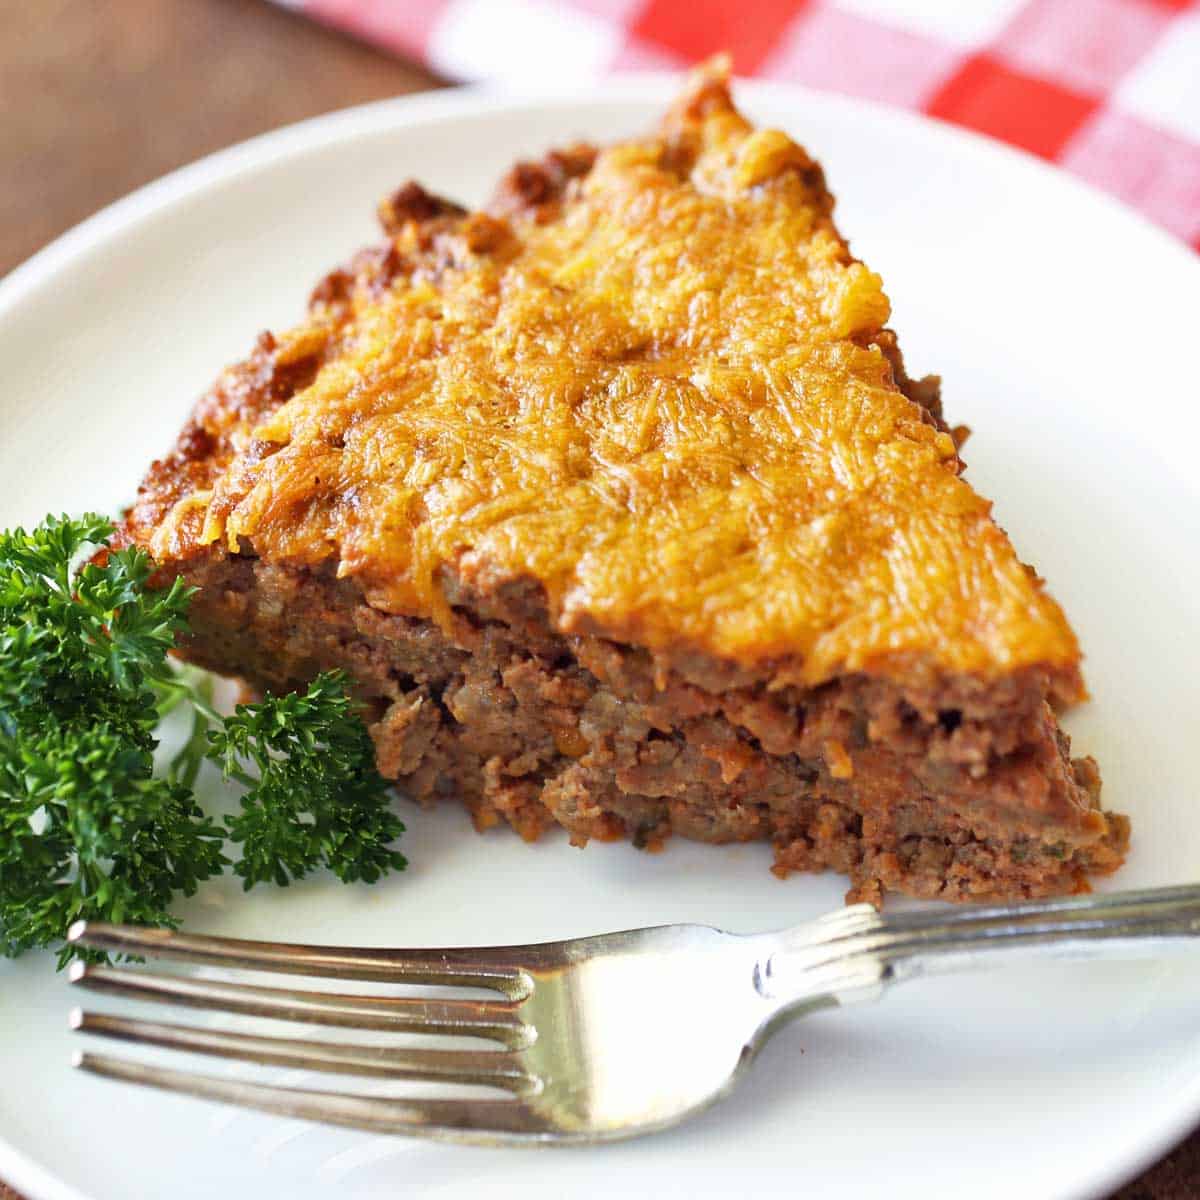 EatingWell Meat Pie